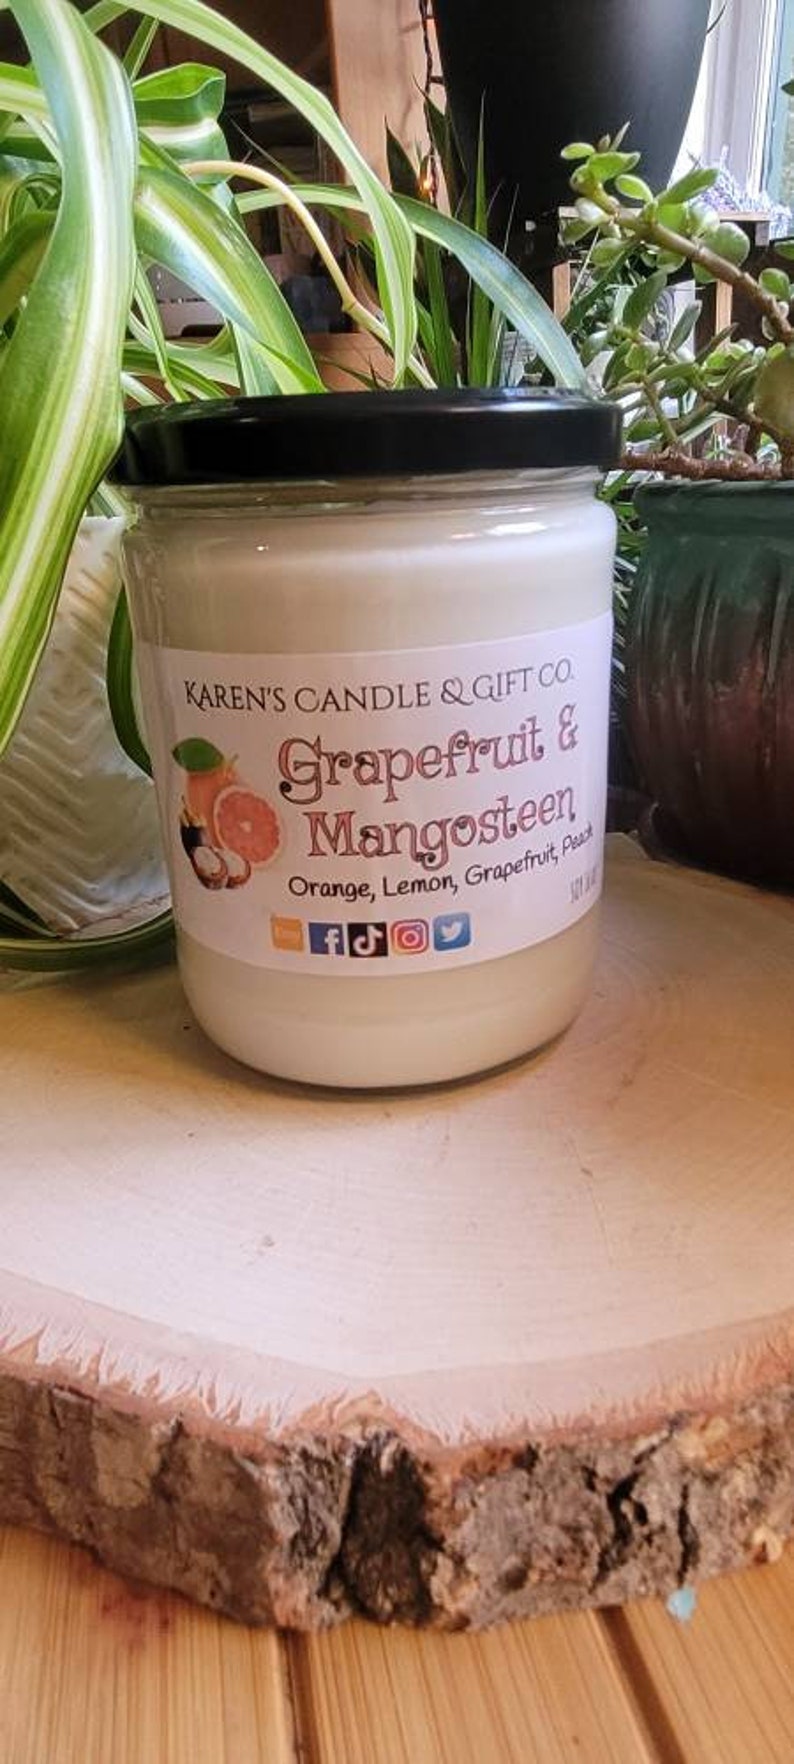 Grapefruit & Mangosteen Soy Candle, 16 oz highly scented, slow burning, glass, eco-friendly, handmade, soy wax, spa, aromatherapy, citrus image 3